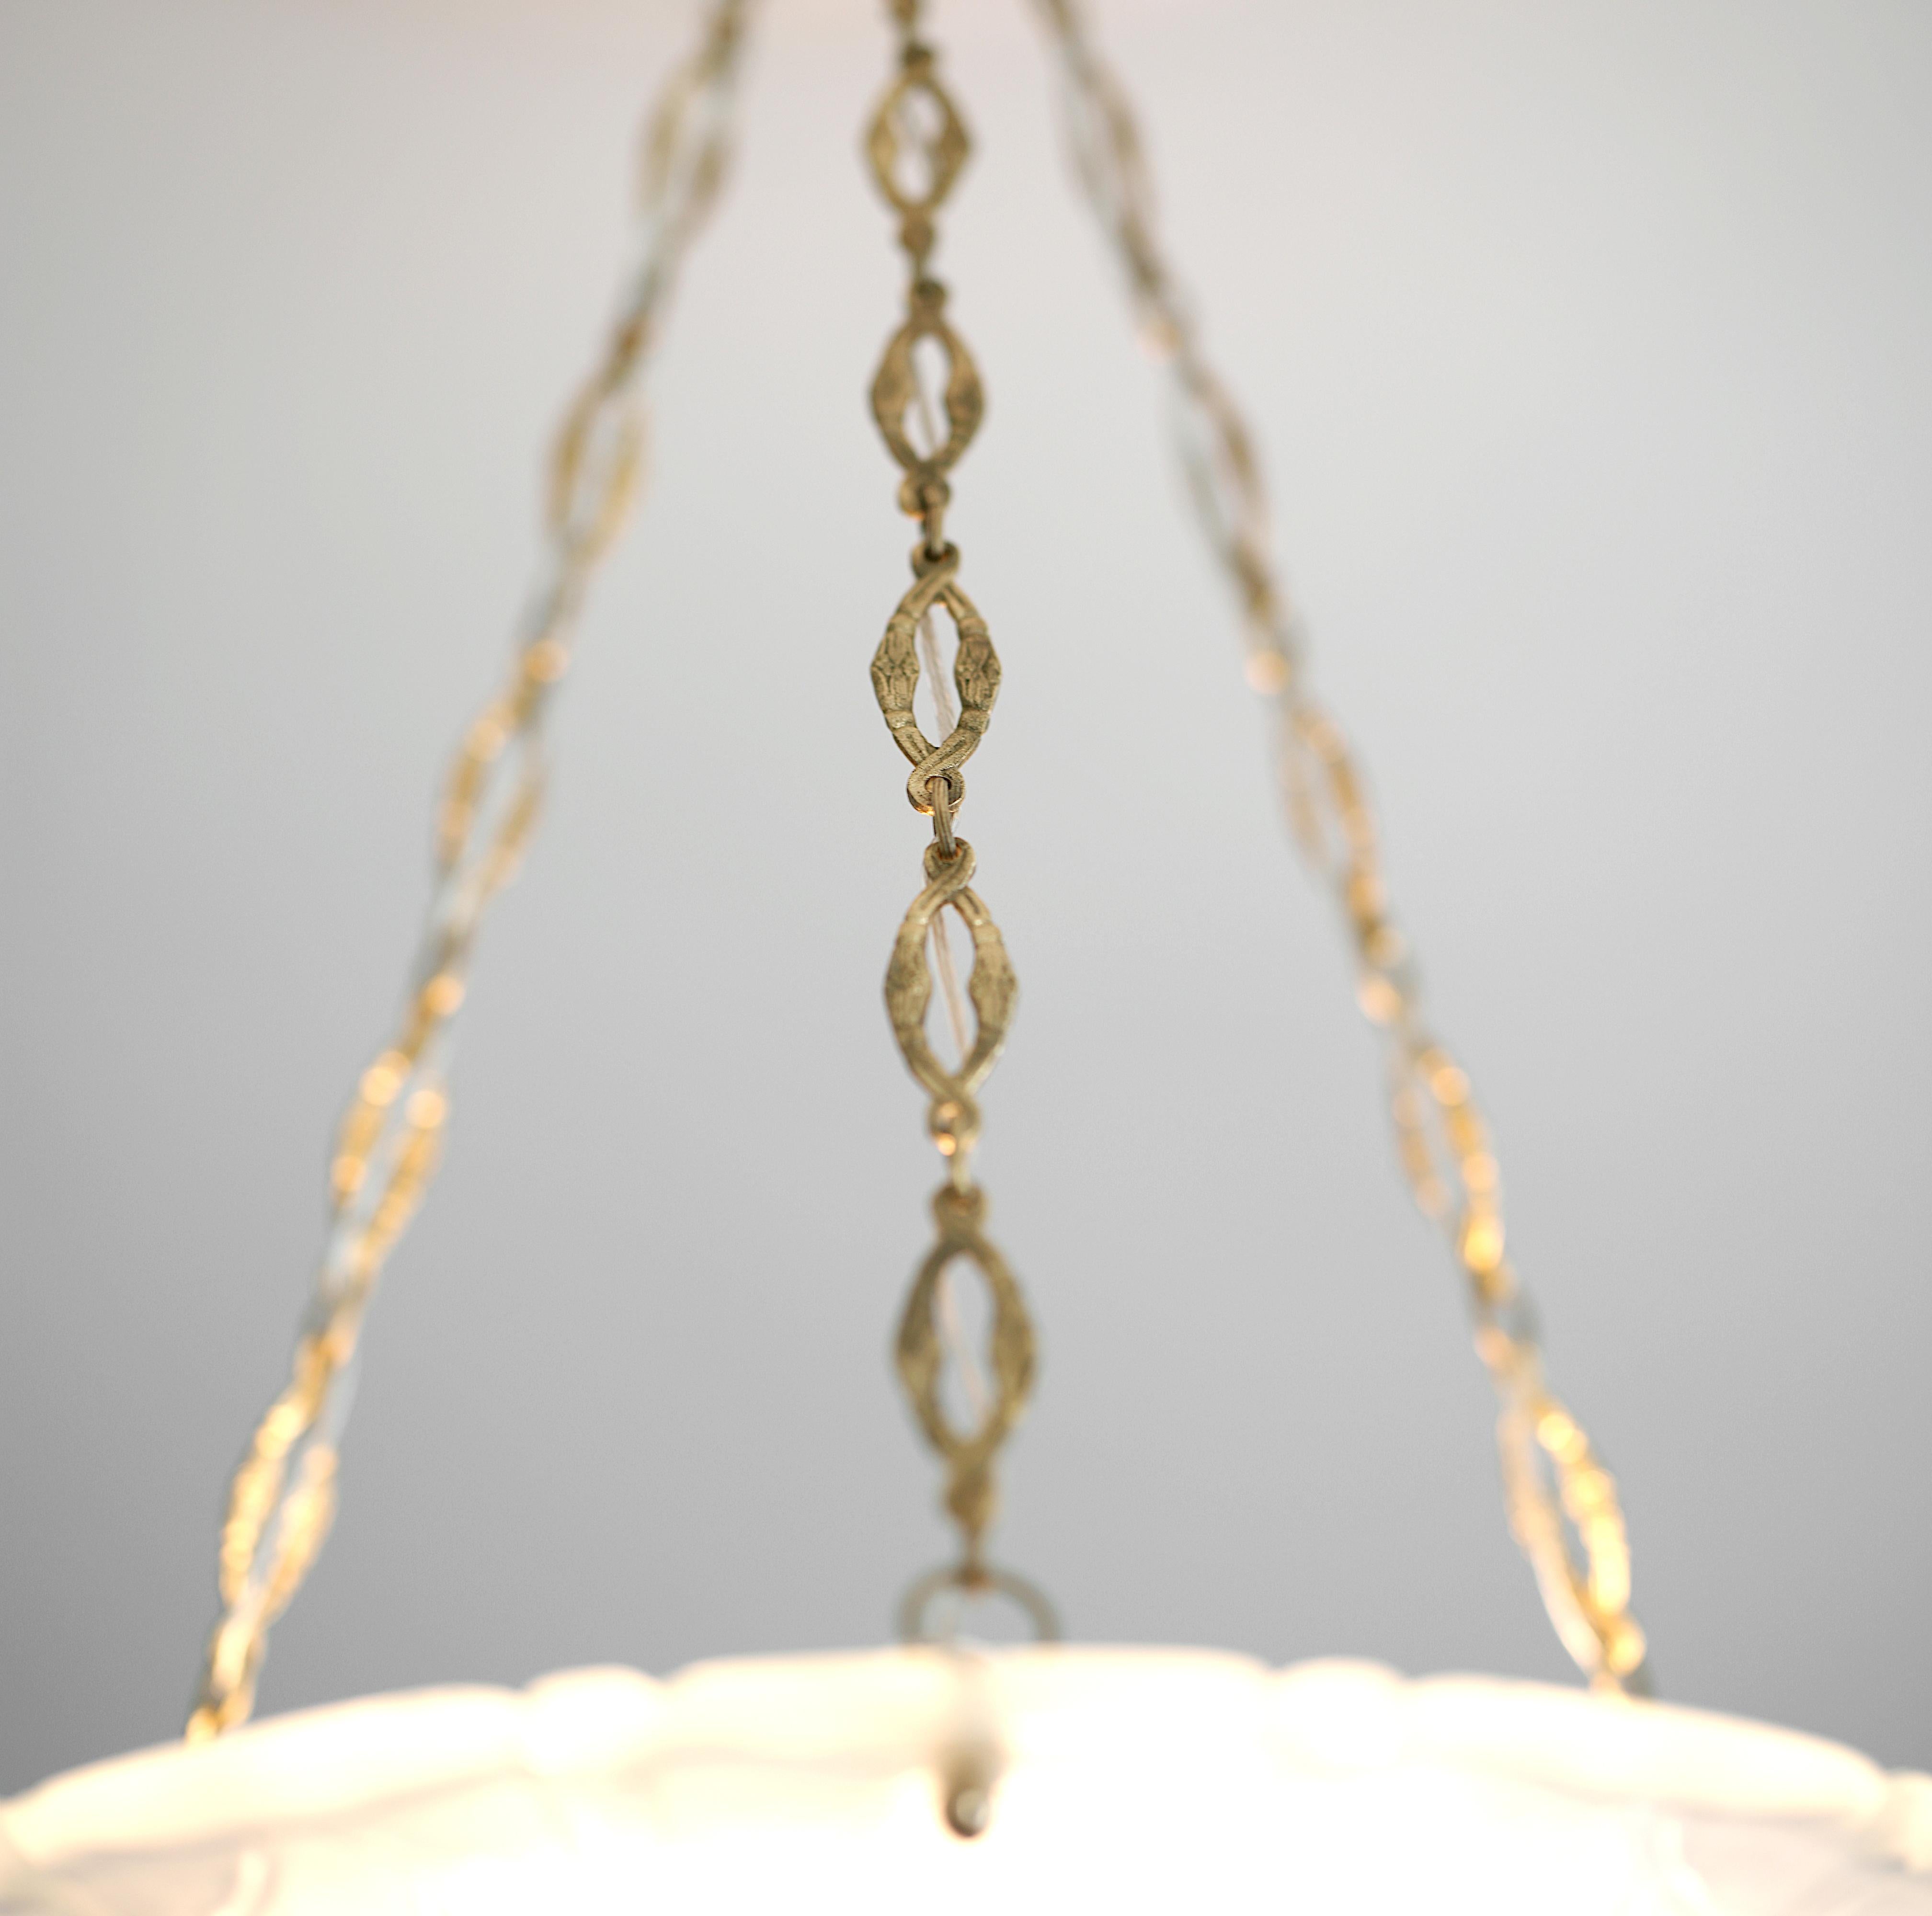 Daum Pierre D'Avesn Large French Art Deco Pendant Chandelier, Early 1930s For Sale 3